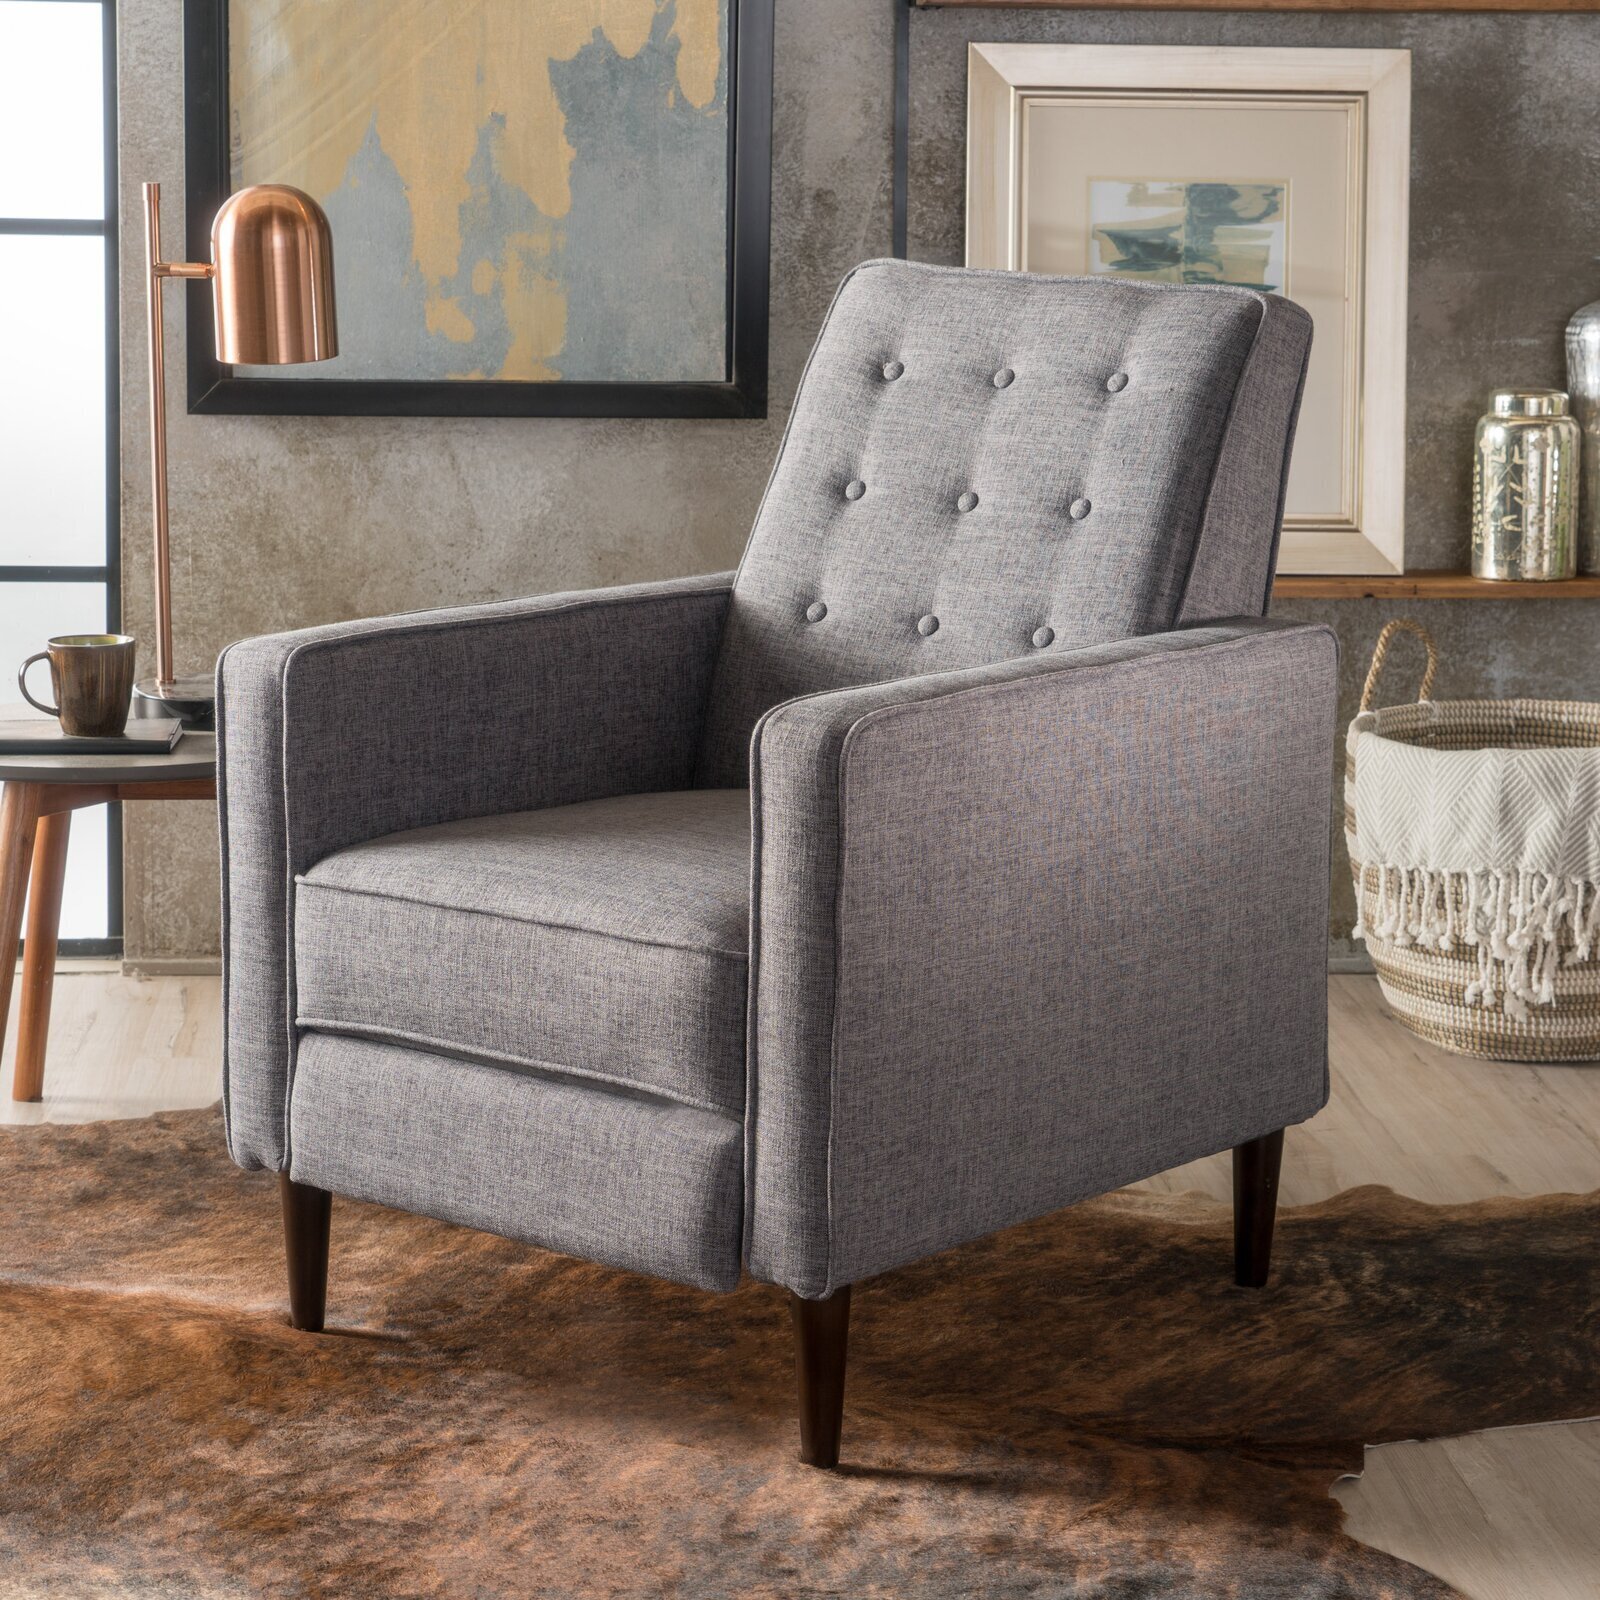 Tufted Contemporary Recliner